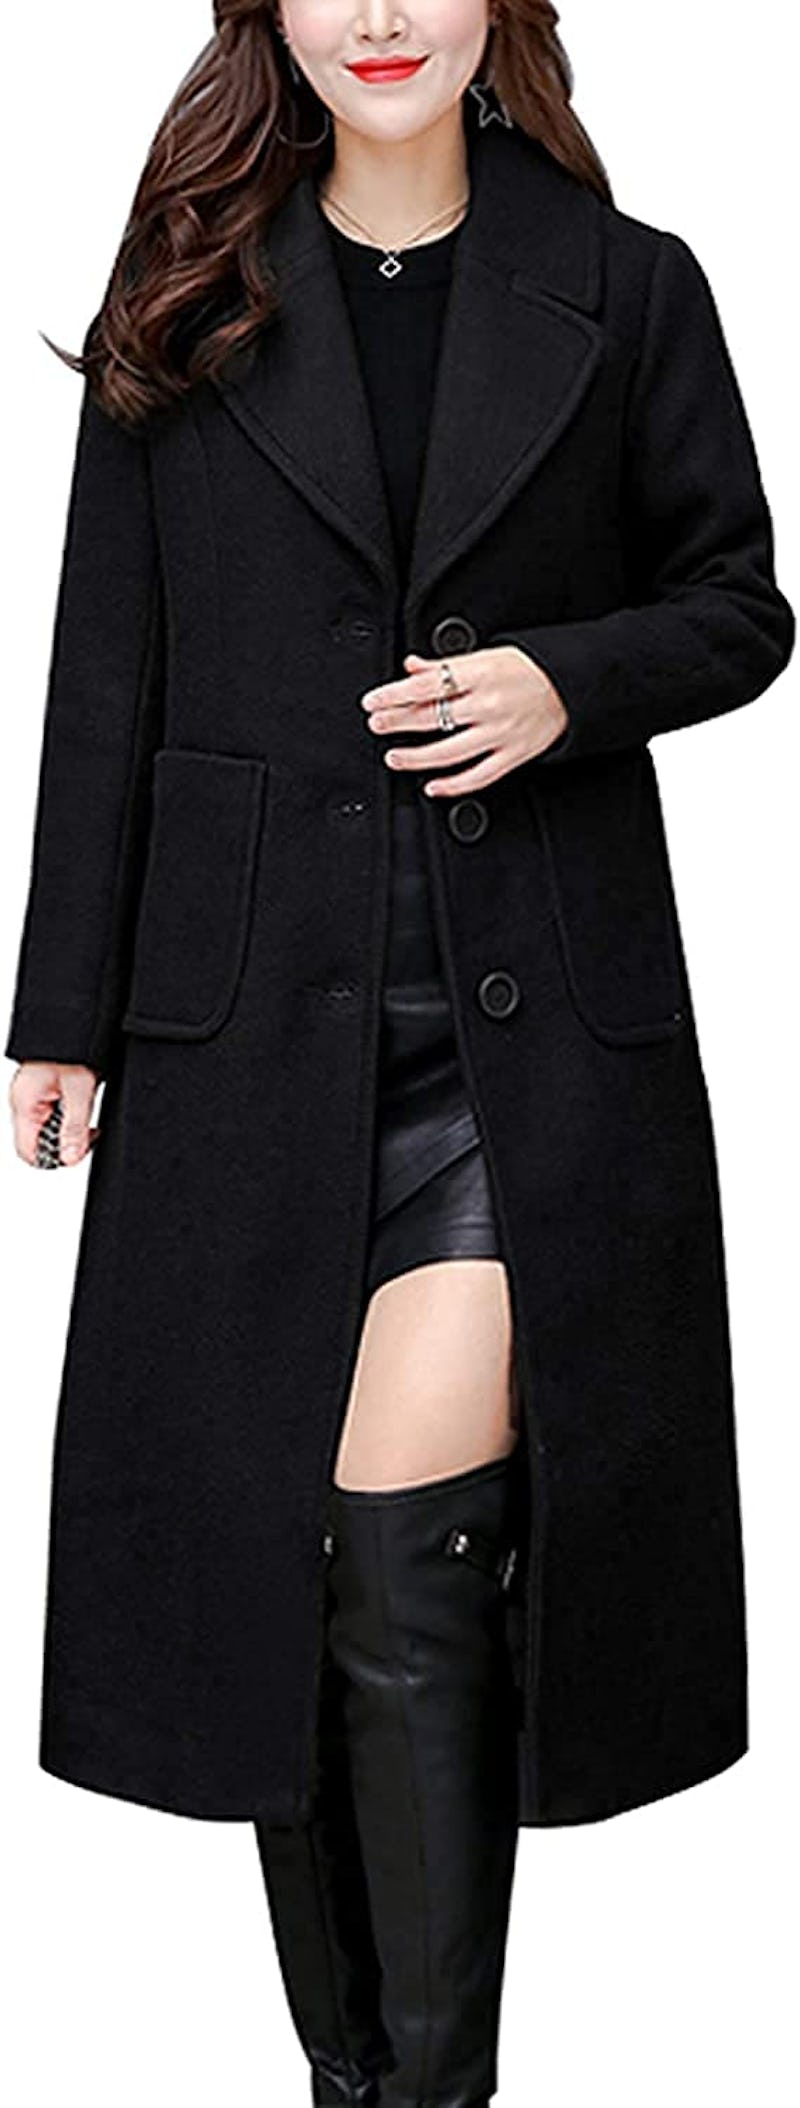 The 6 Best Winter Coats For Petites